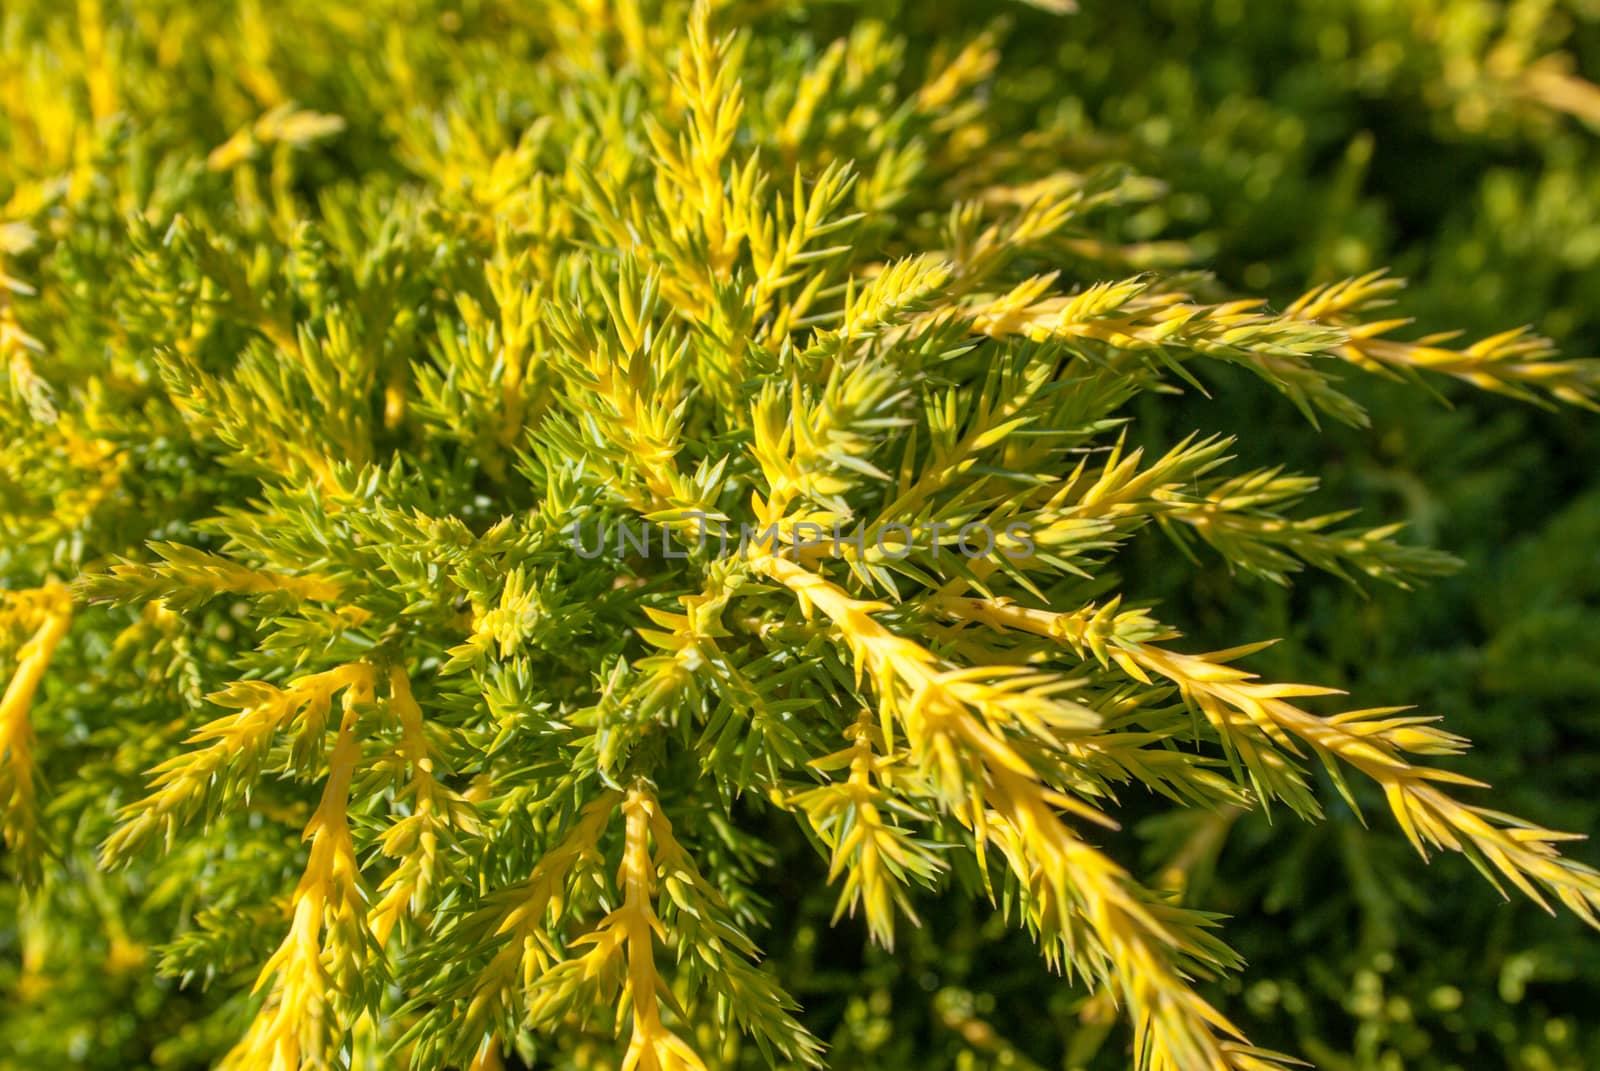 Thuja occidentalis background. Thuja occidentalis is an evergreen coniferous tree, in the cypress family Cupressaceae, which is native to the northeast of the United States and the southeast of Canada